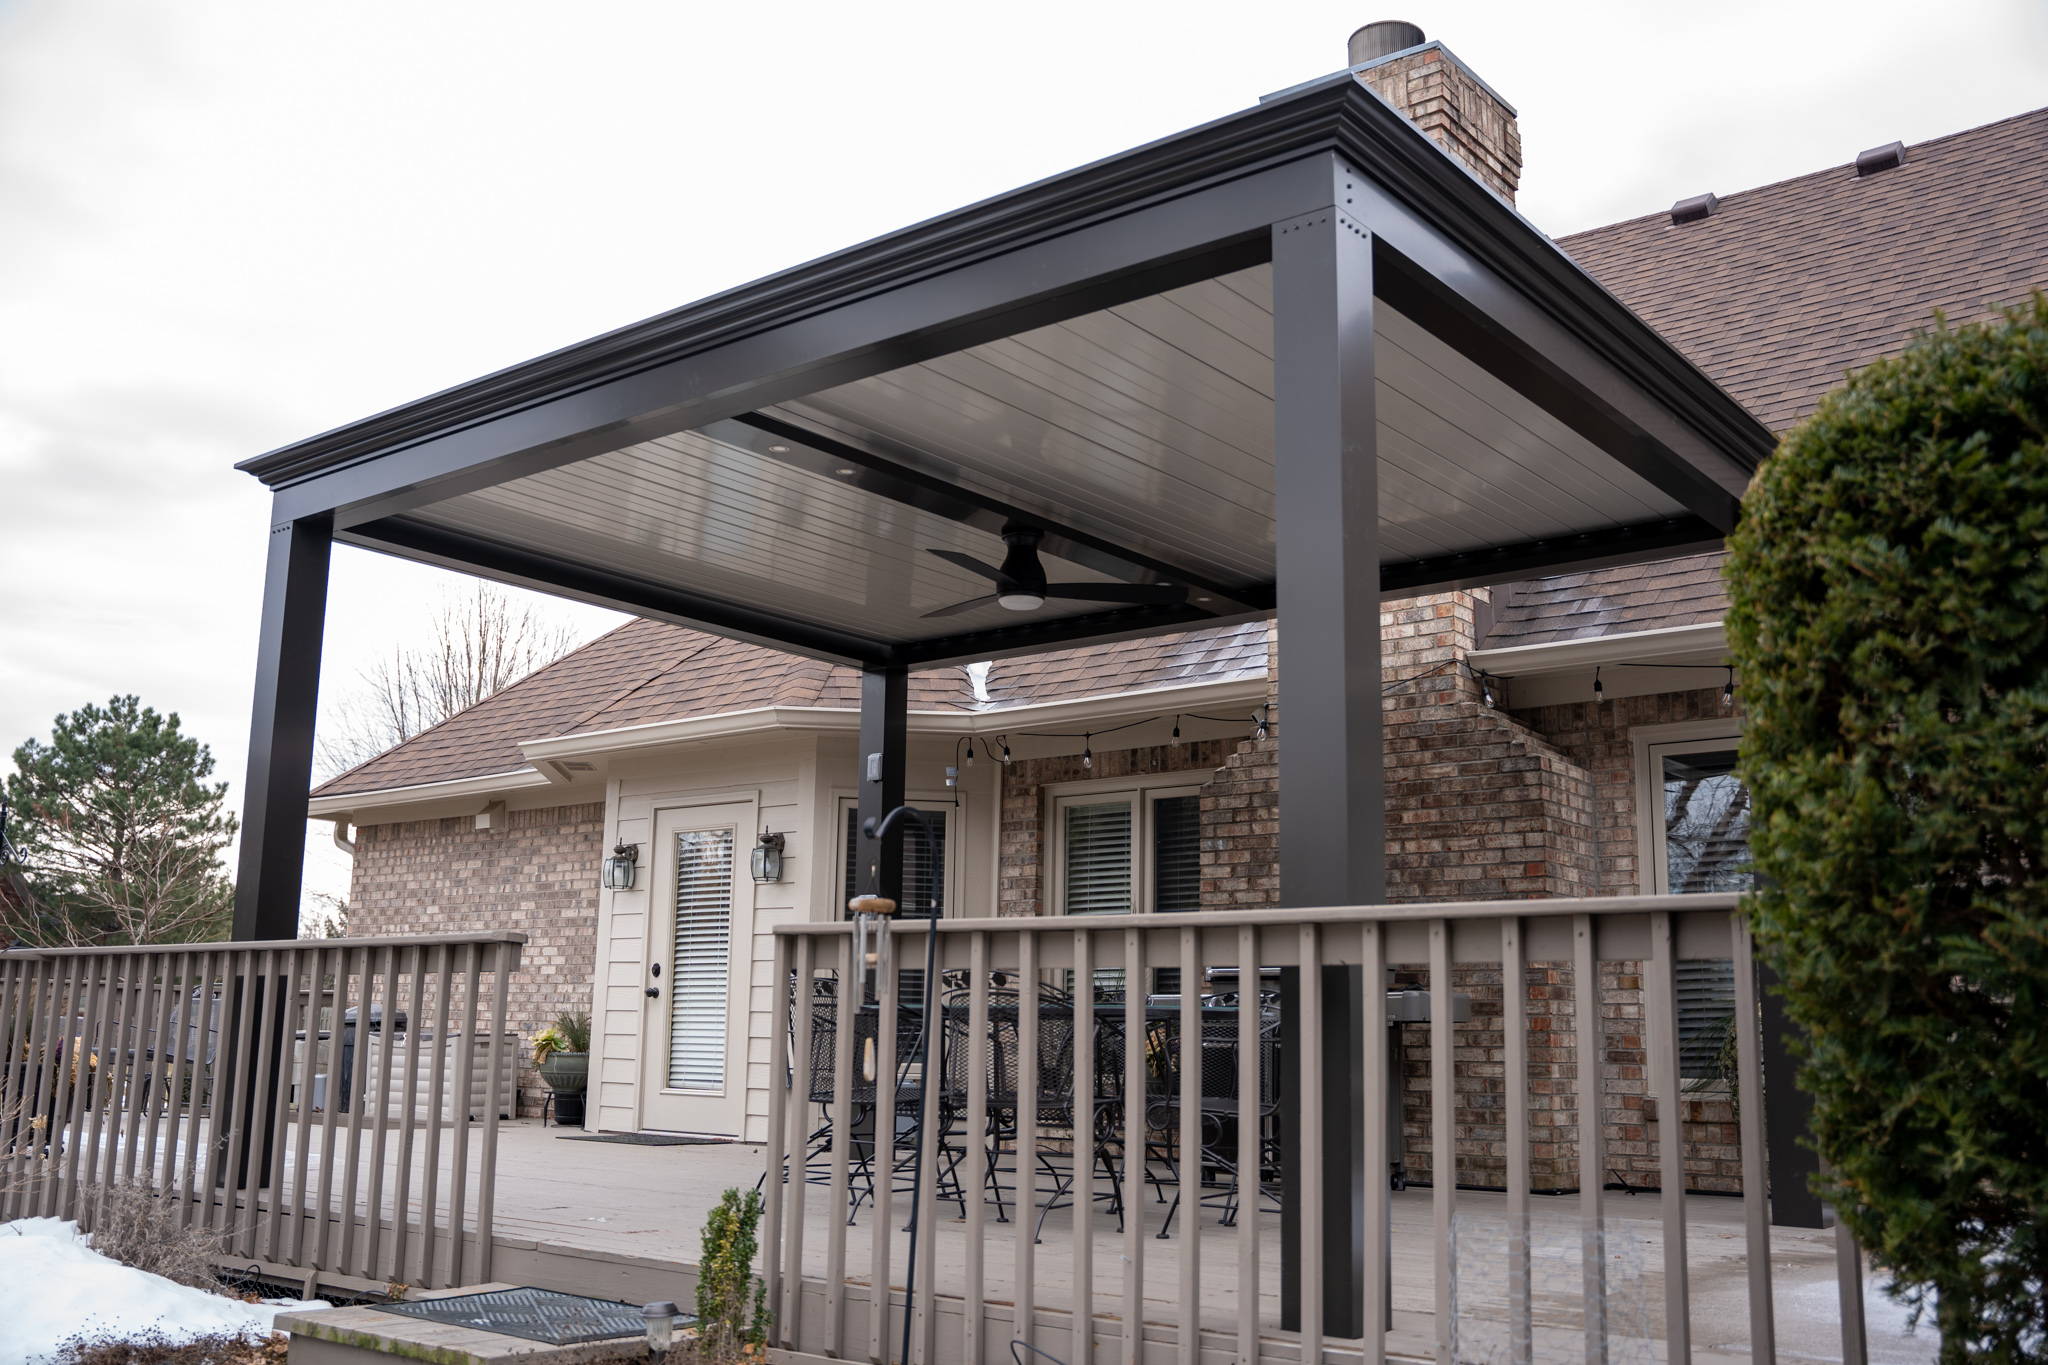 Enjoy your entire backyard and improve your outdoor living areas with a free estimate on a pergola.